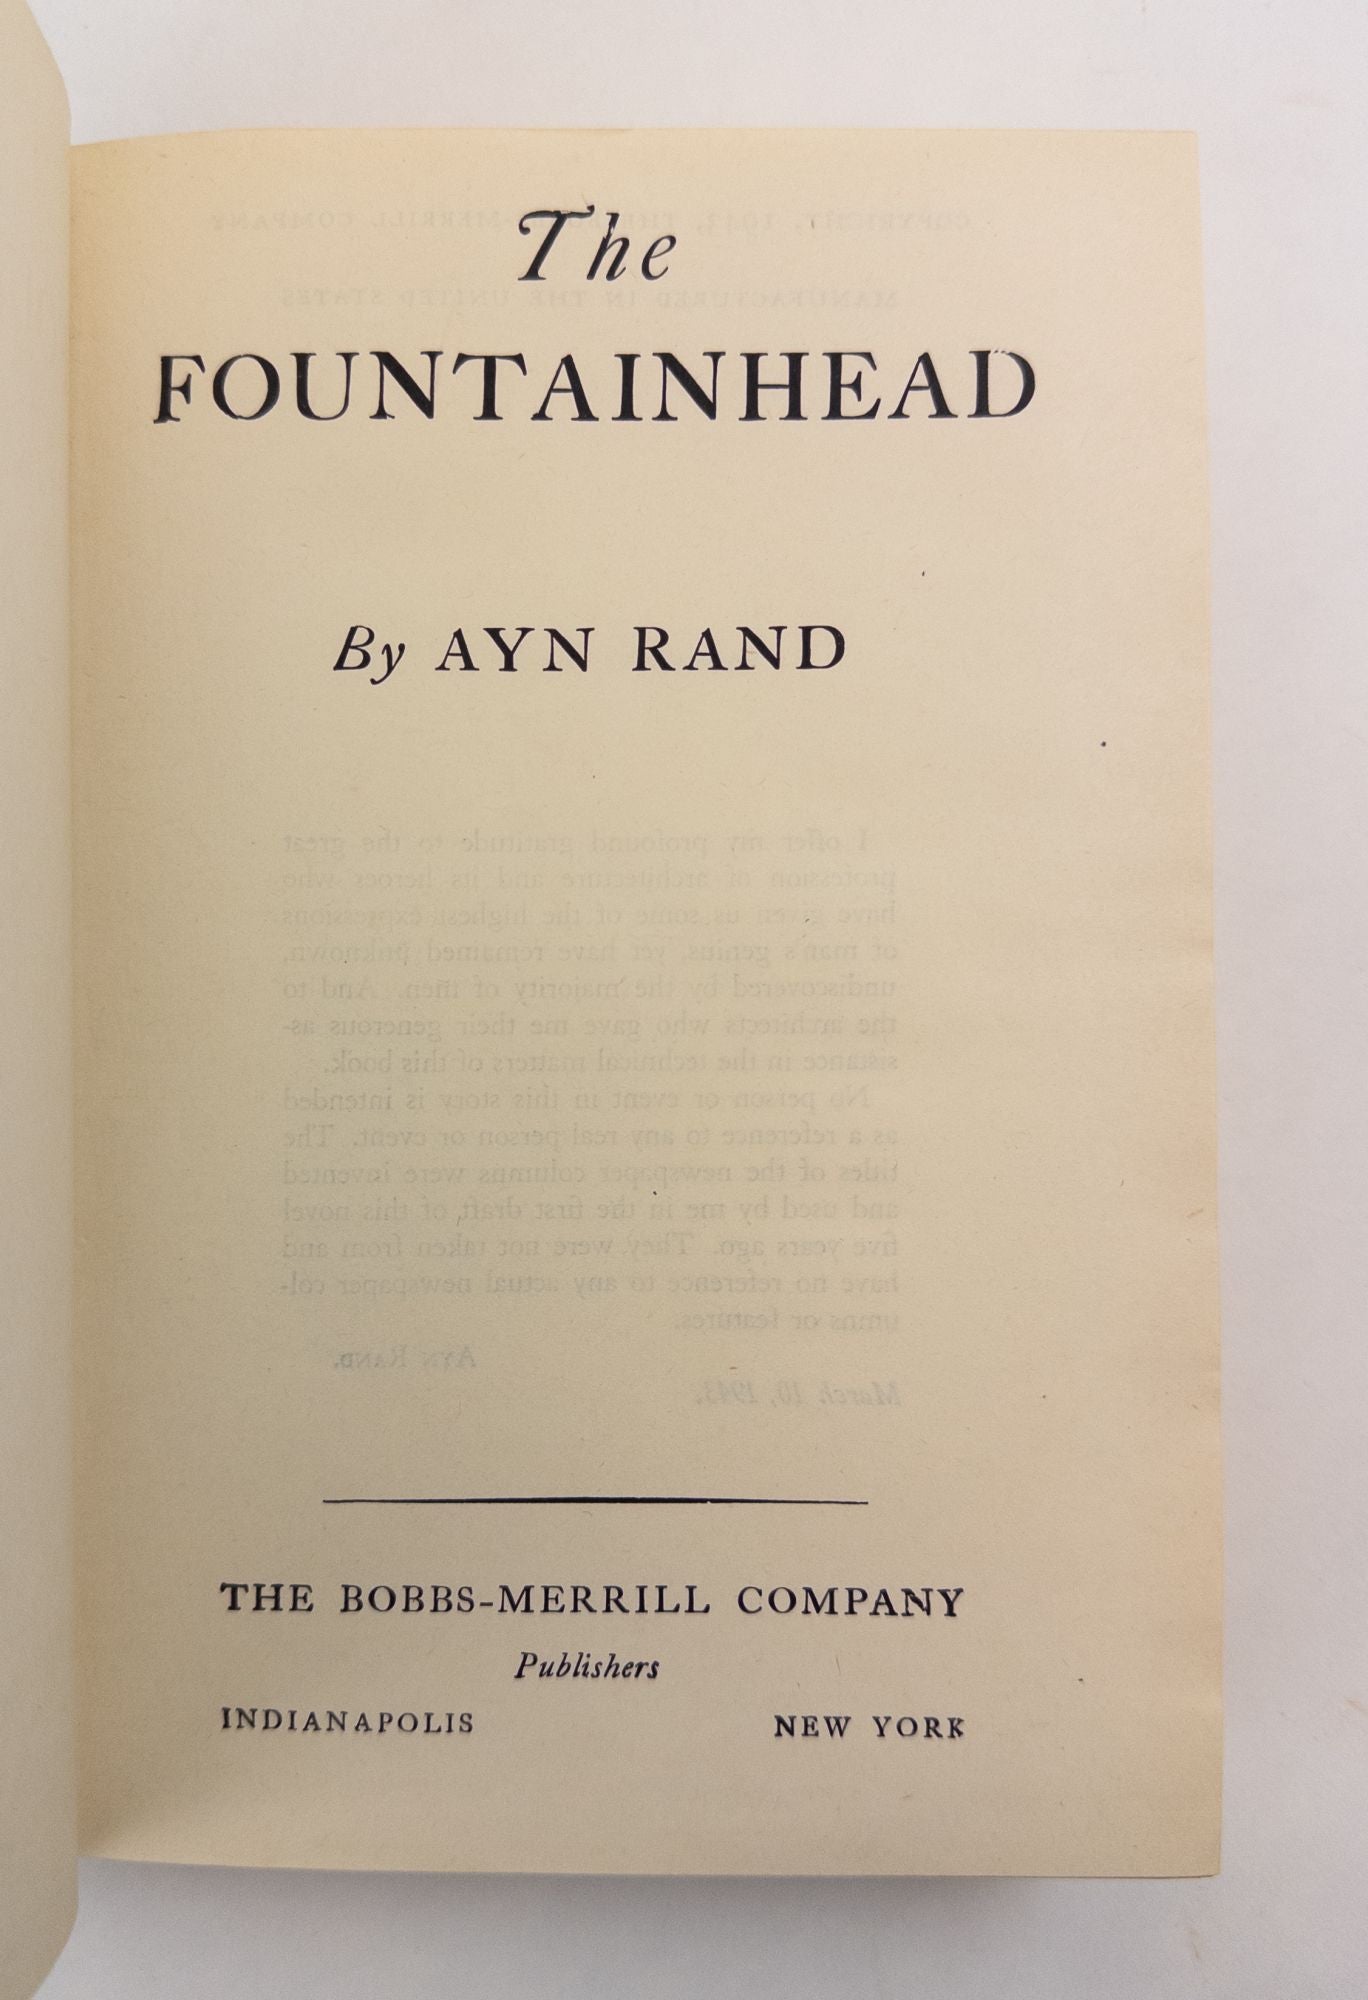 Product Image for THE FOUNTAINHEAD